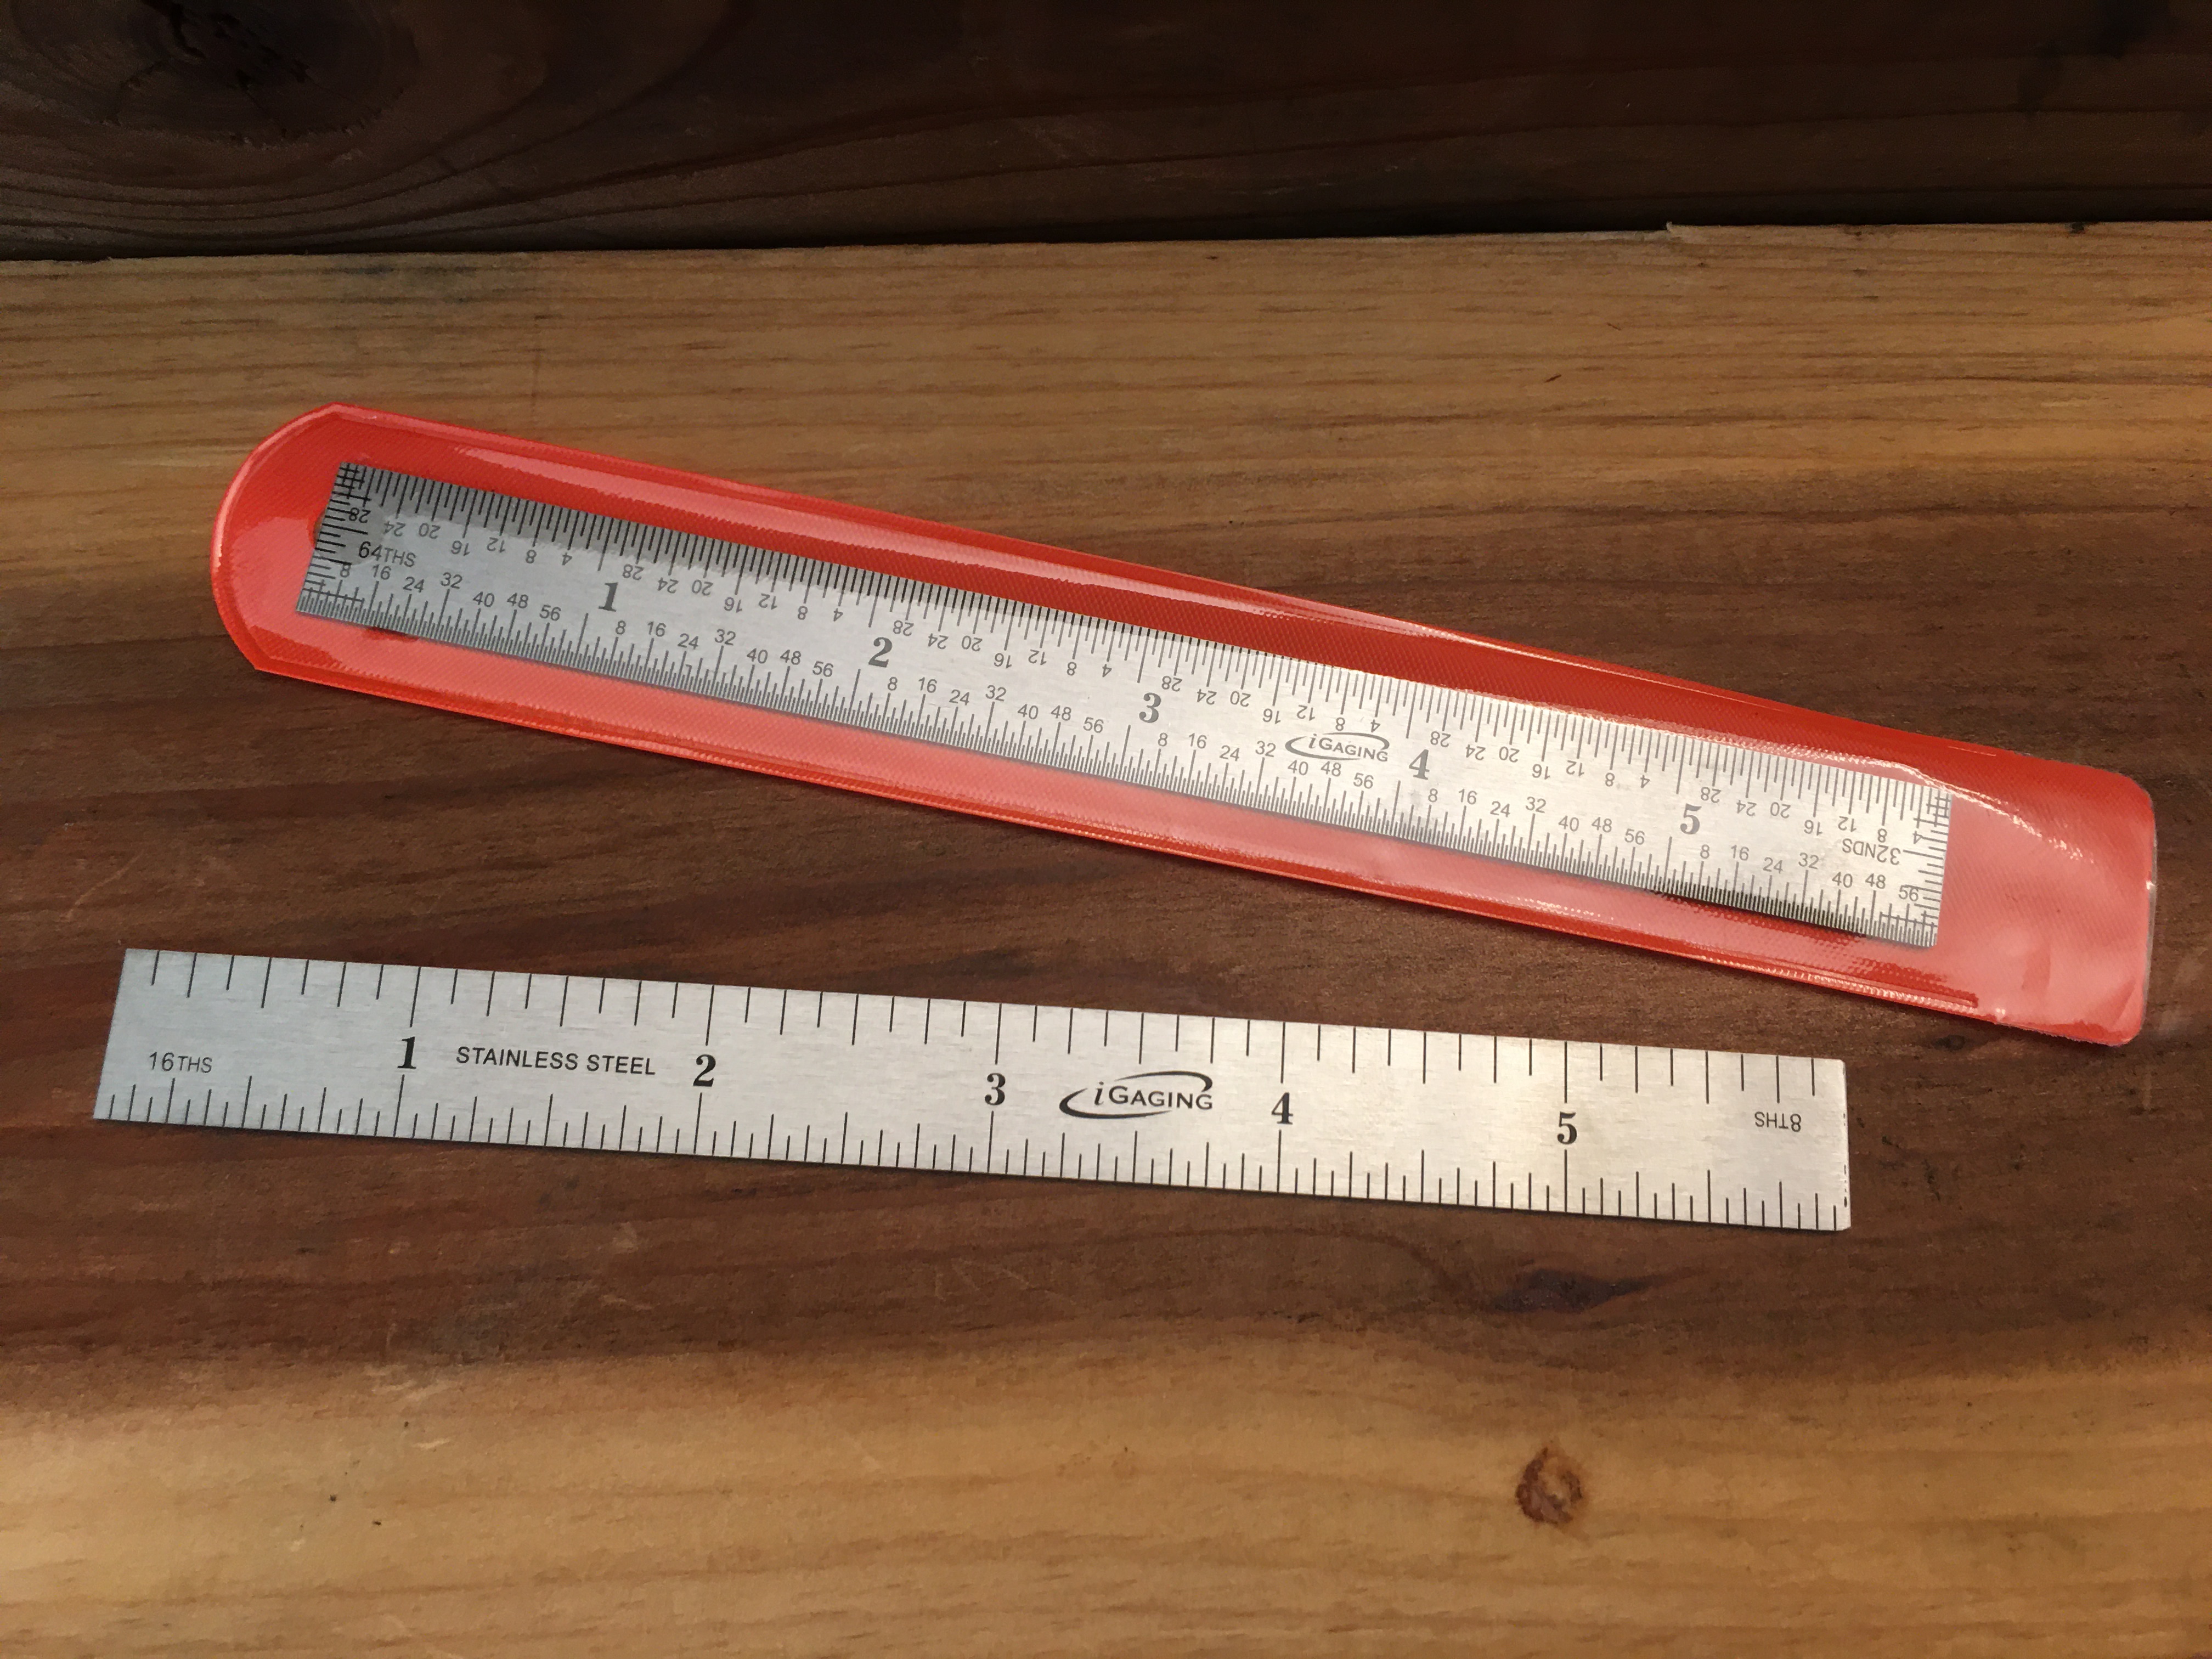 Standard Issue 6 Inch Metal Ruler